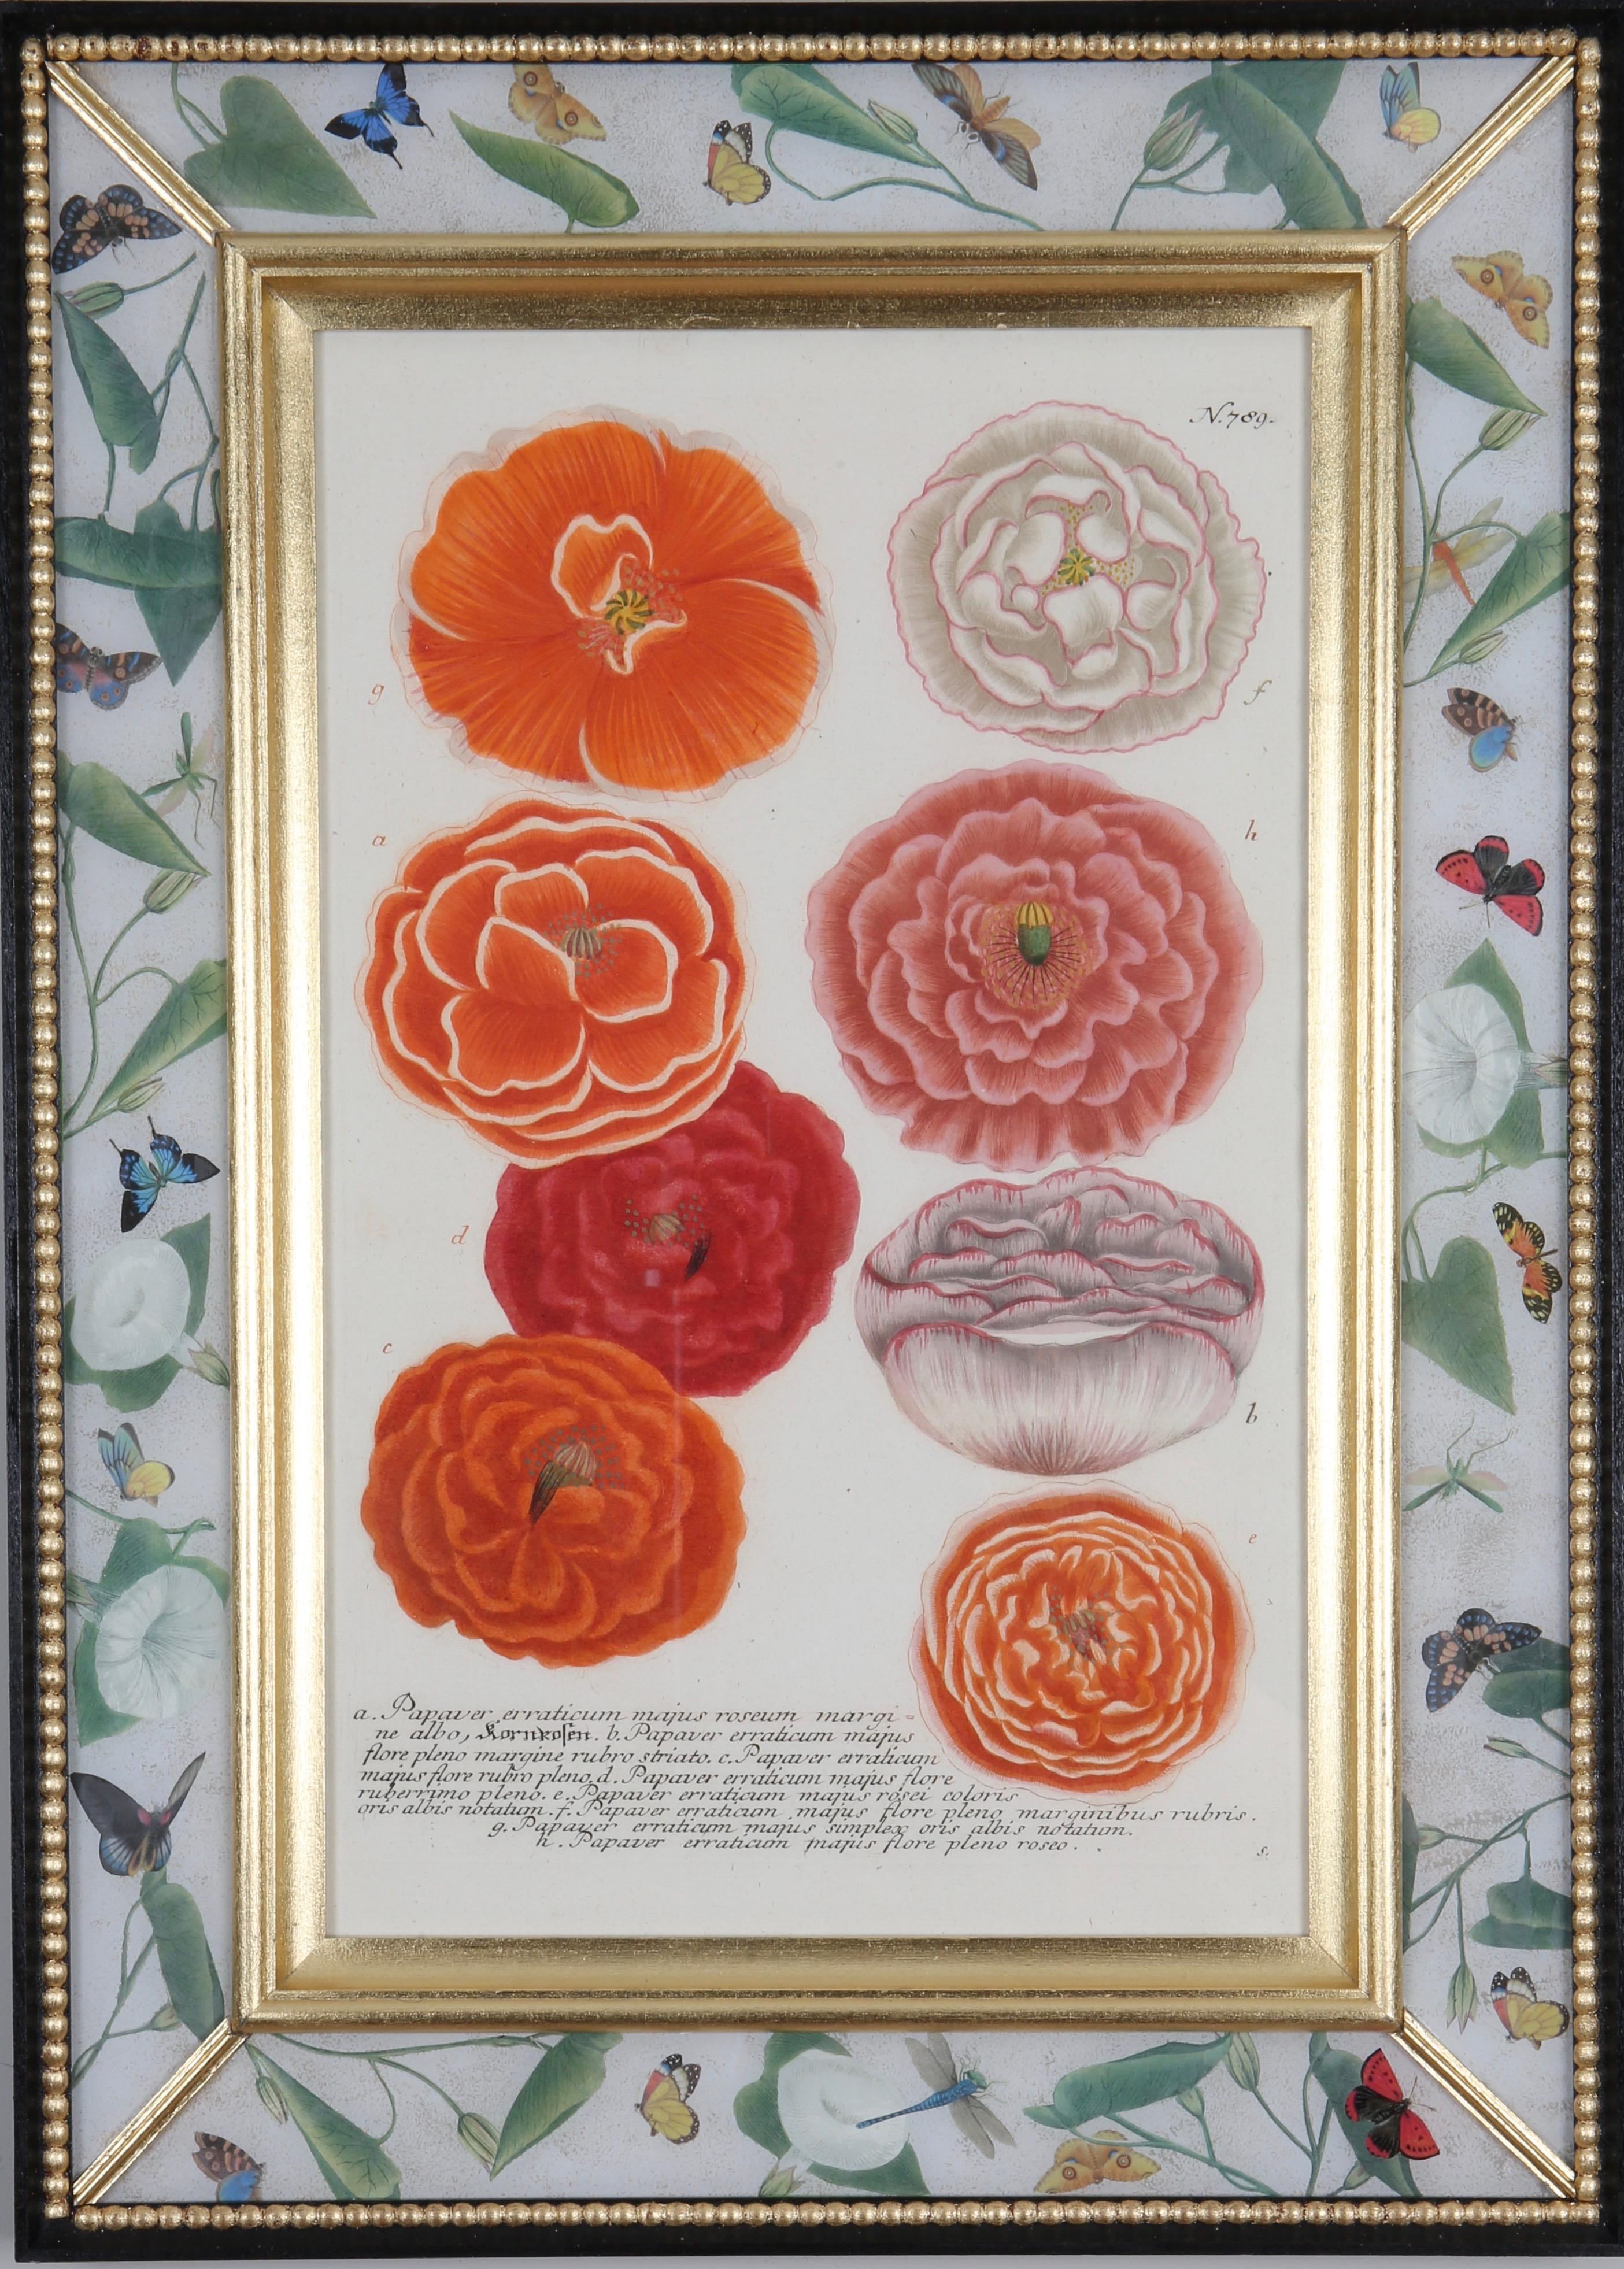 Price is for the set of 12 framed engravings.

Hand-coloured mezzotint engravings from: 